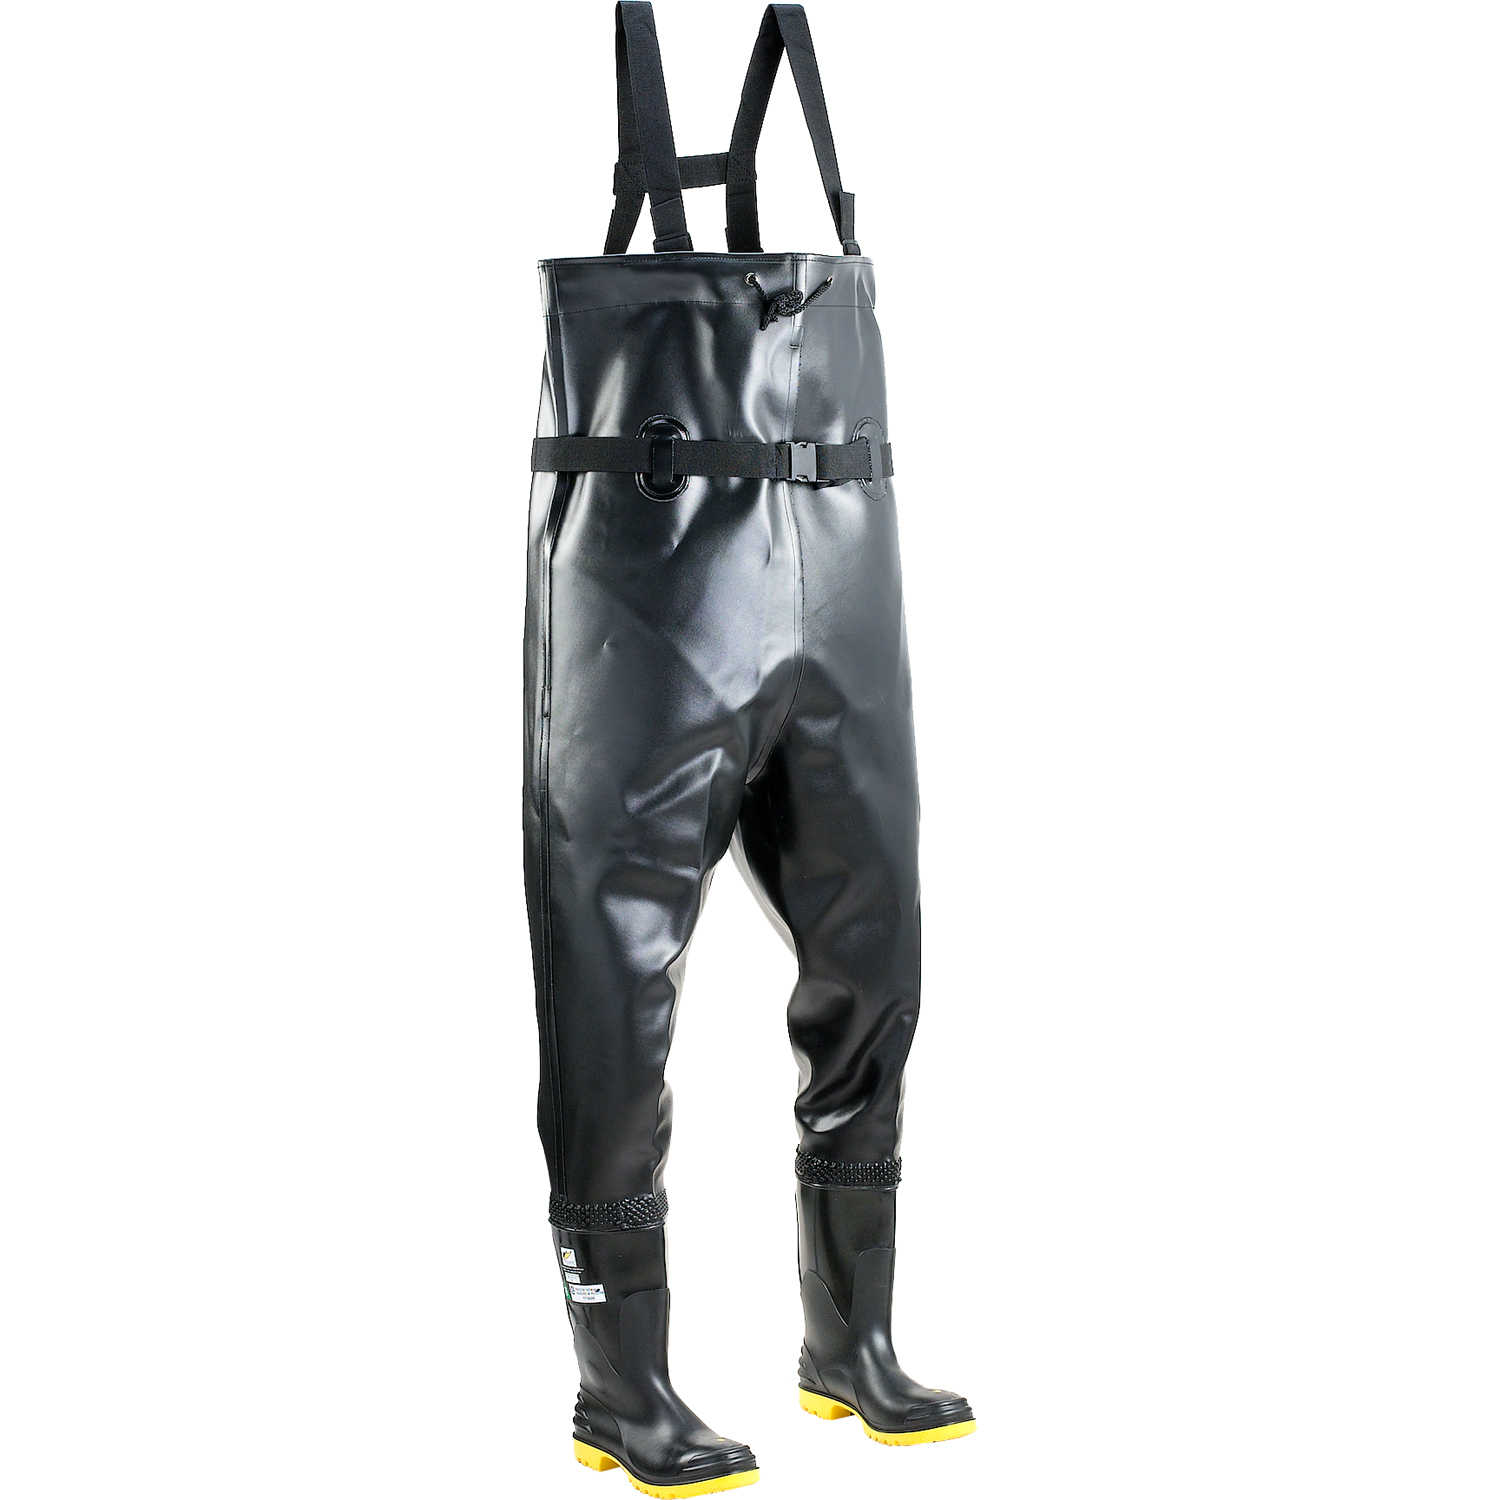 Black Details about   Dunlop Men’s Steel Toe Chest Waders Sizes 8,10,11,12,13,14 